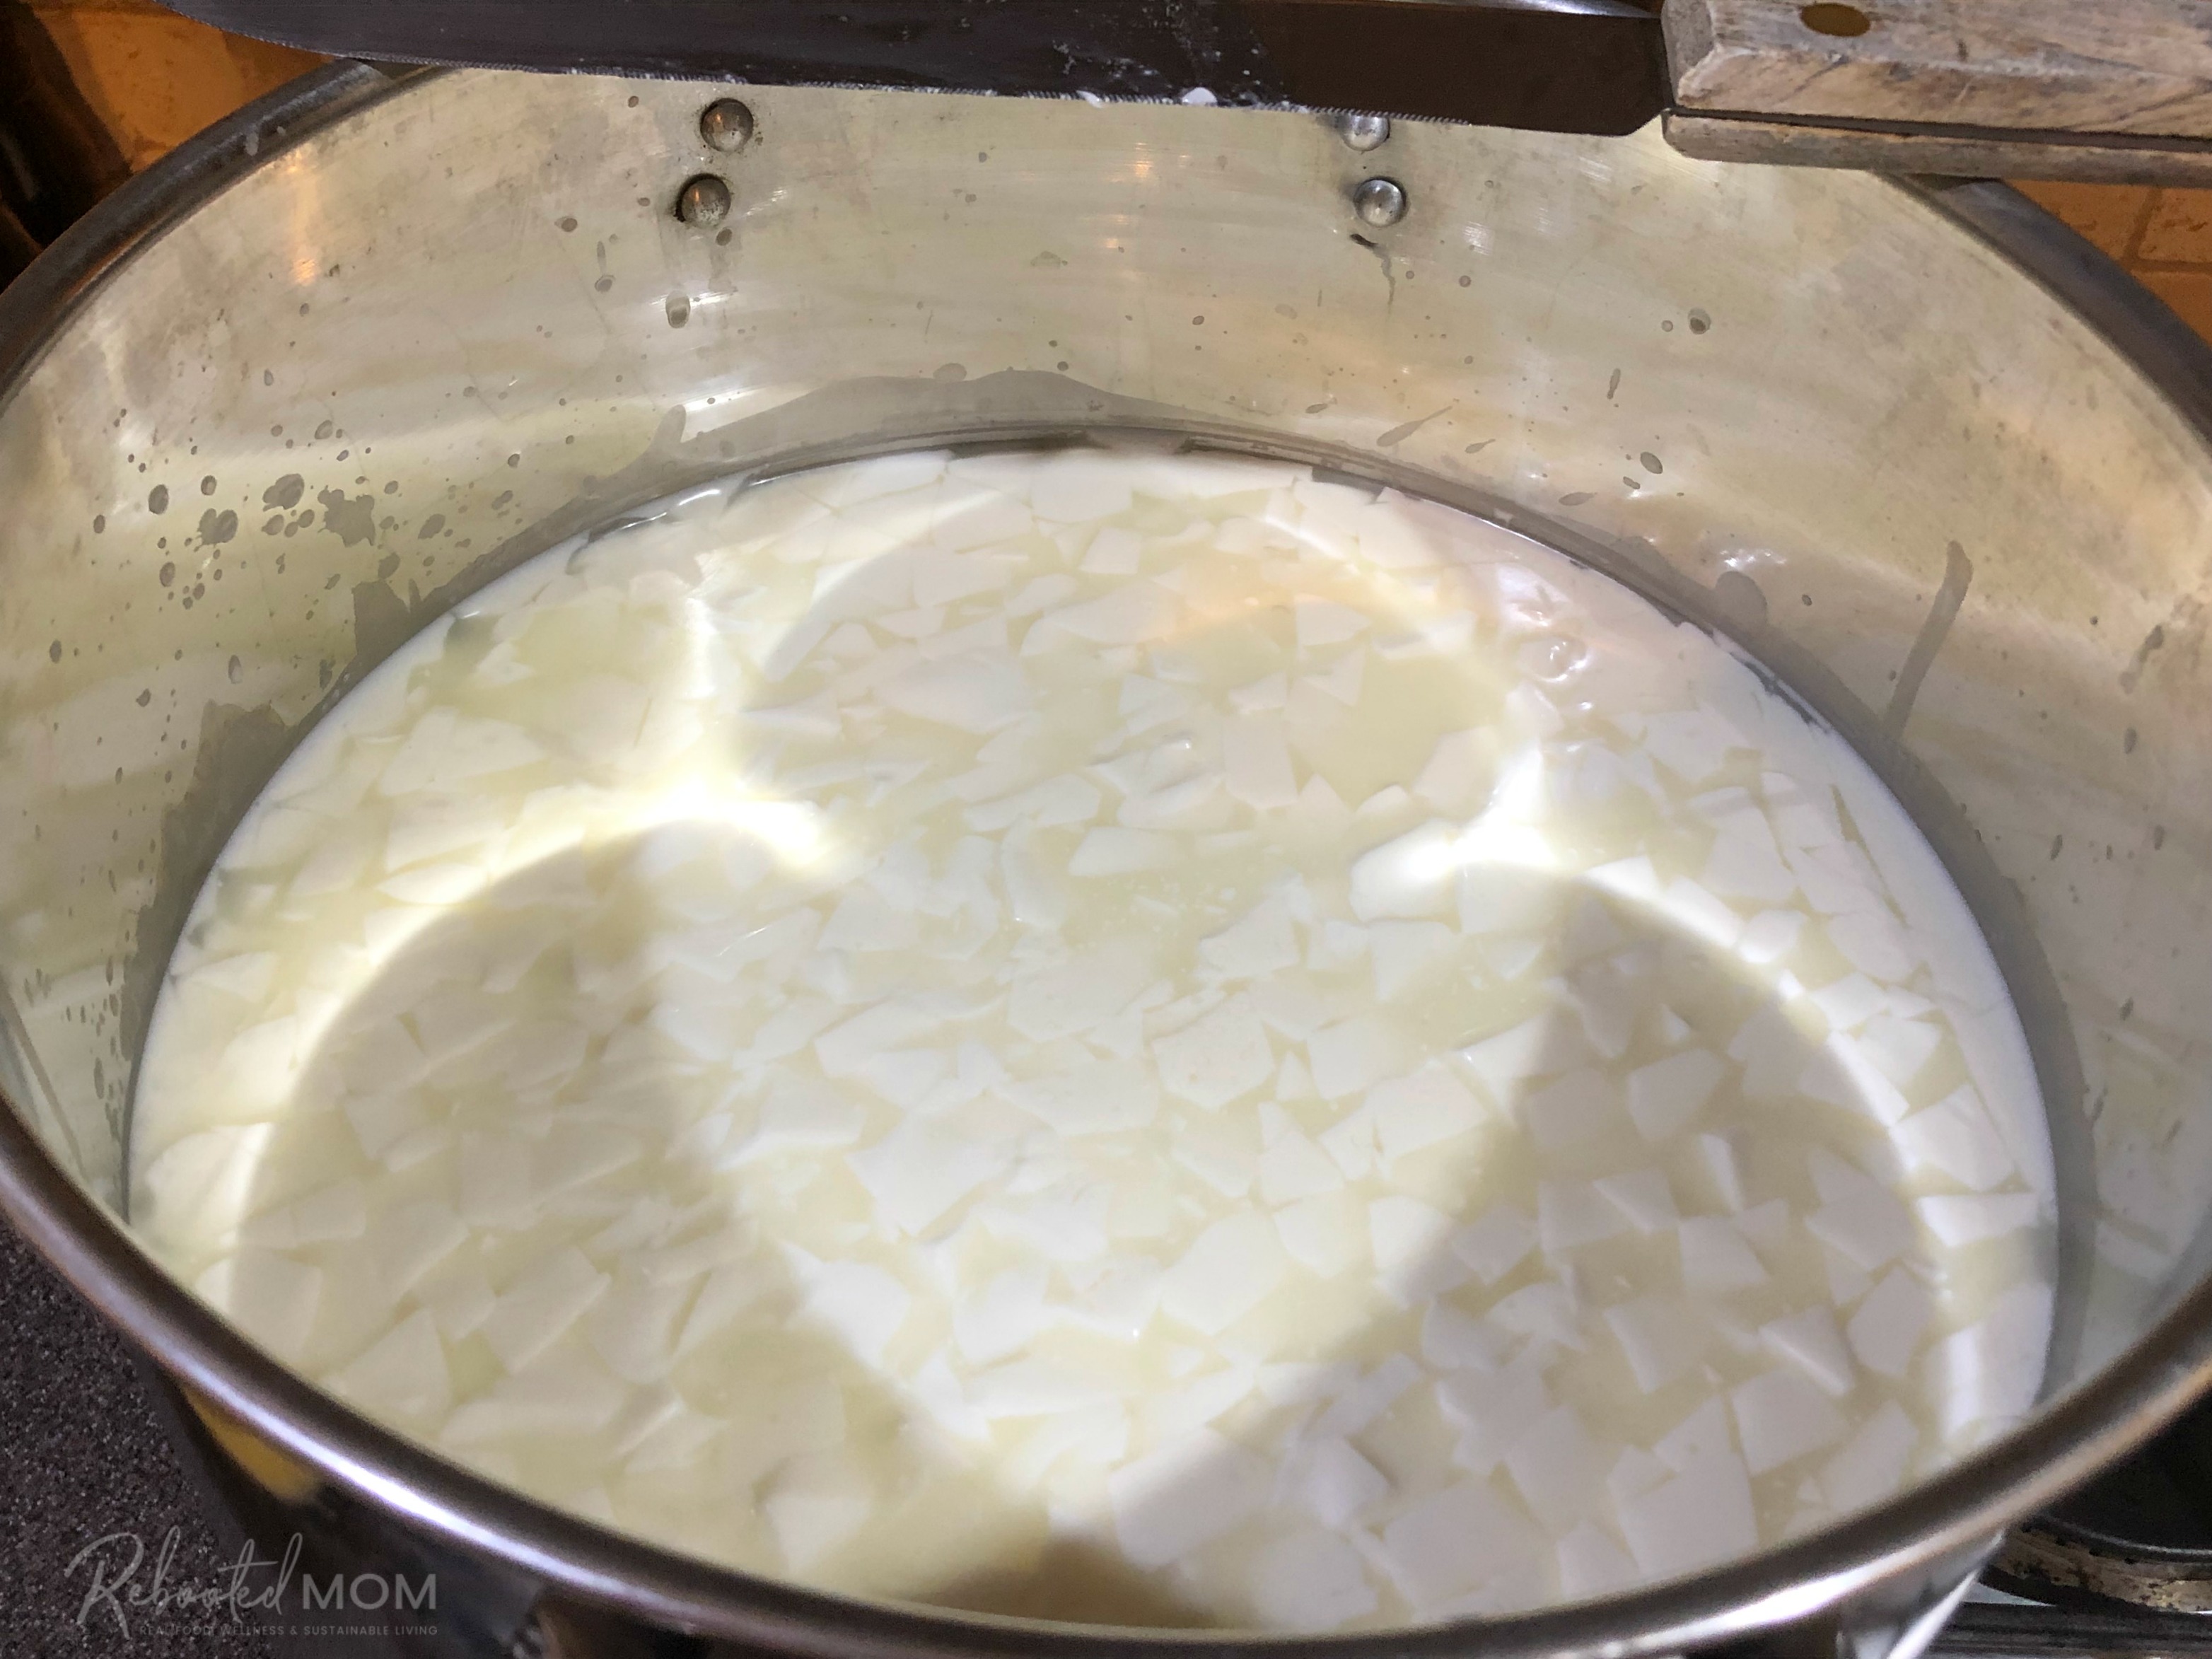 Monterey Jack Cheese - cut the curd